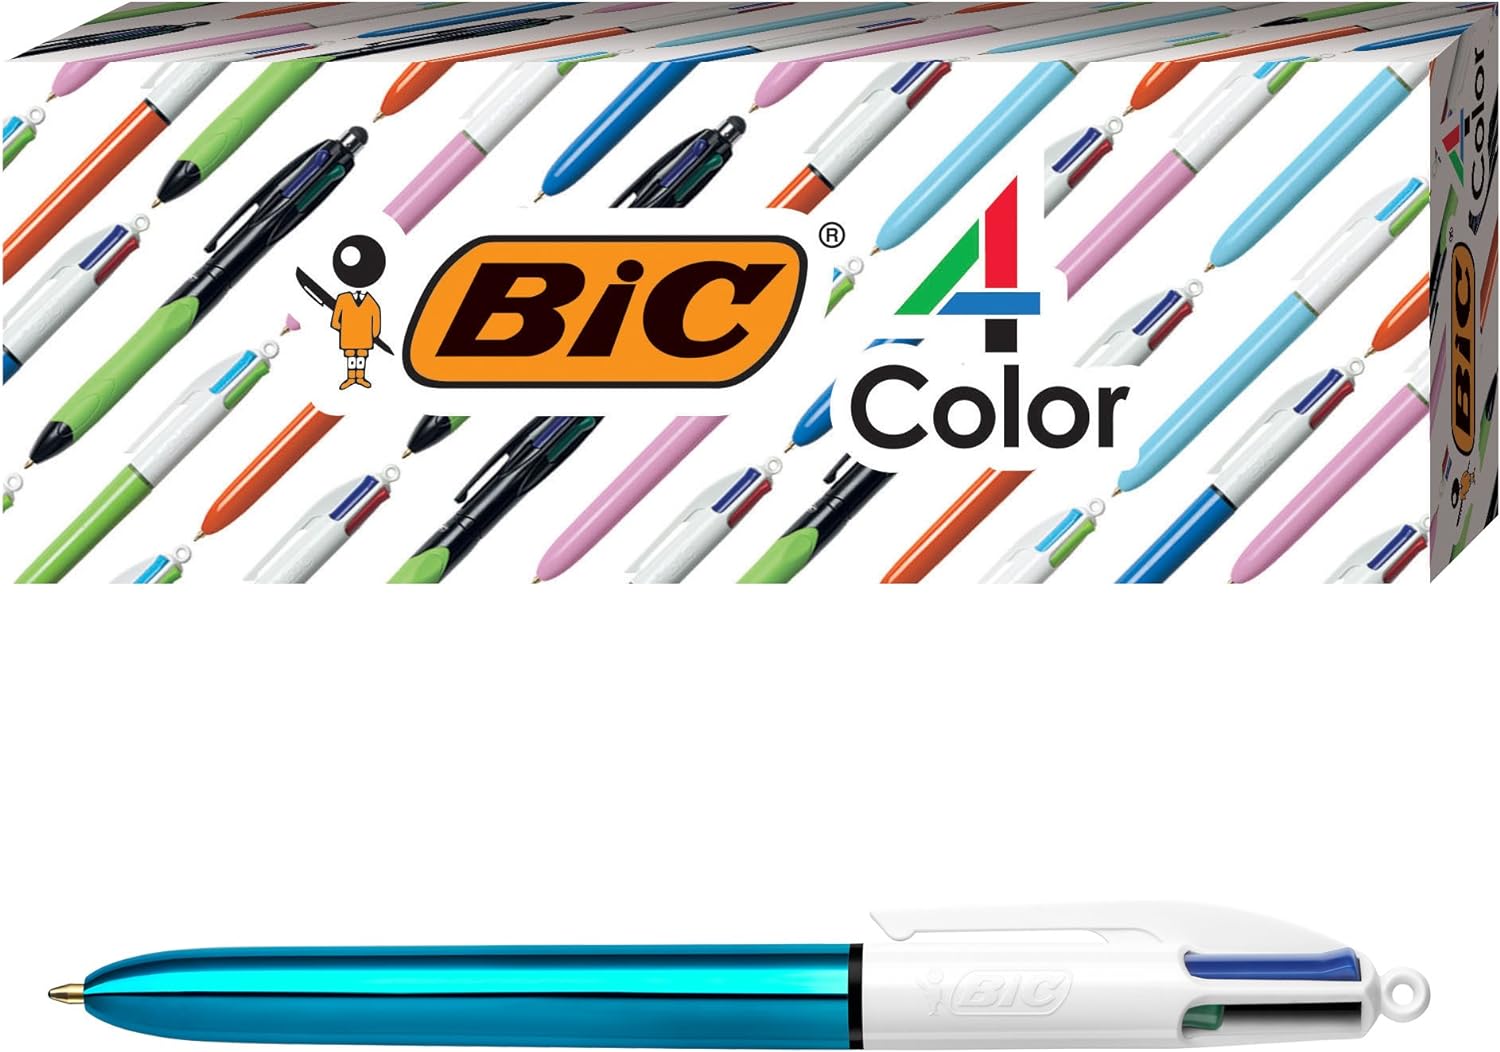 Perfection in a pen with 4 colors! Finish is Shiny and doesnt scratch easily. The same pens we used as kids. Love mine.